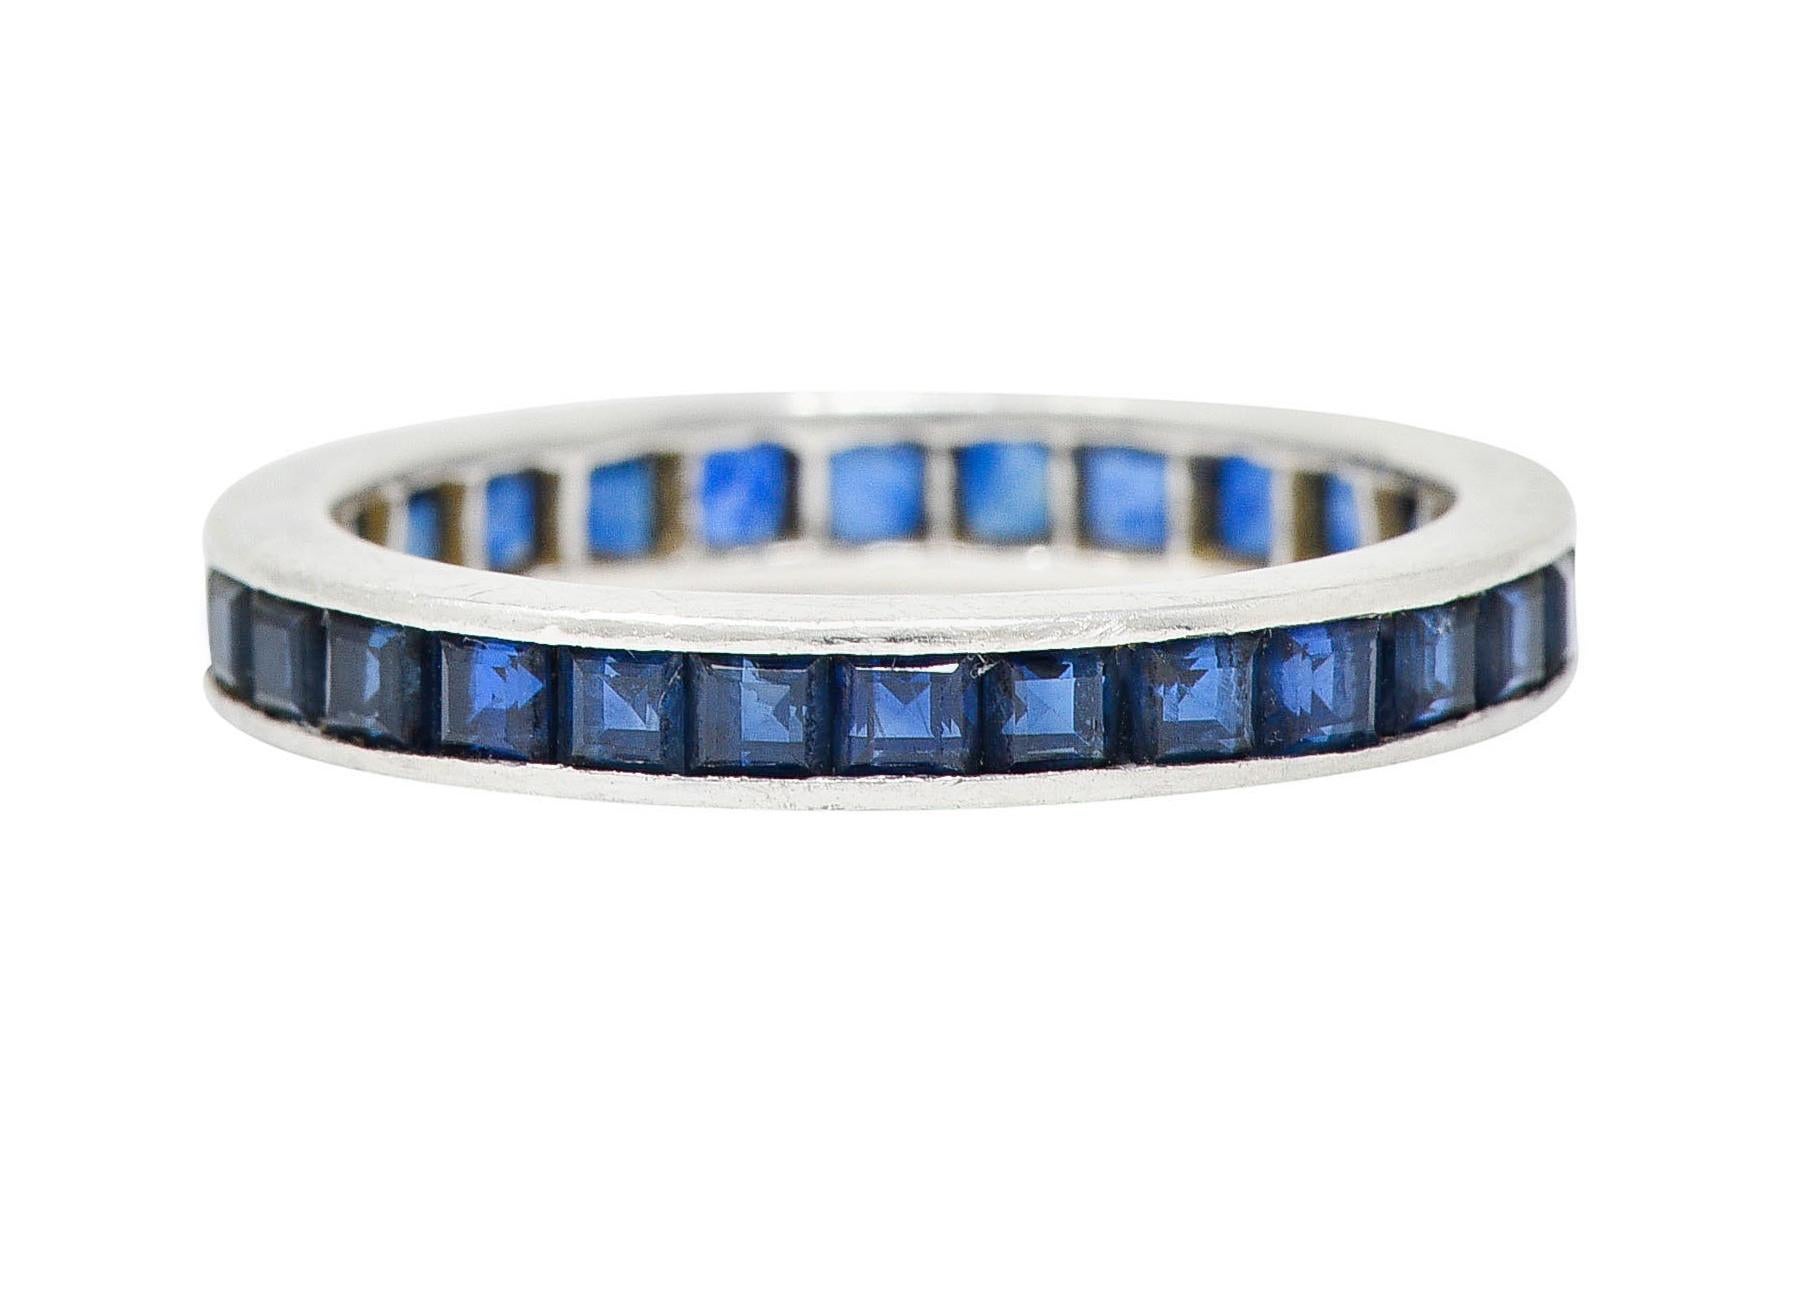 Eternity band ring is channel set fully around with square cut sapphires

Weighing in total approximately 2.00 carats with very well matched royal blue color

Completed by polished channel walls

Stamped PLAT for platinum

Numbered with maker's mark